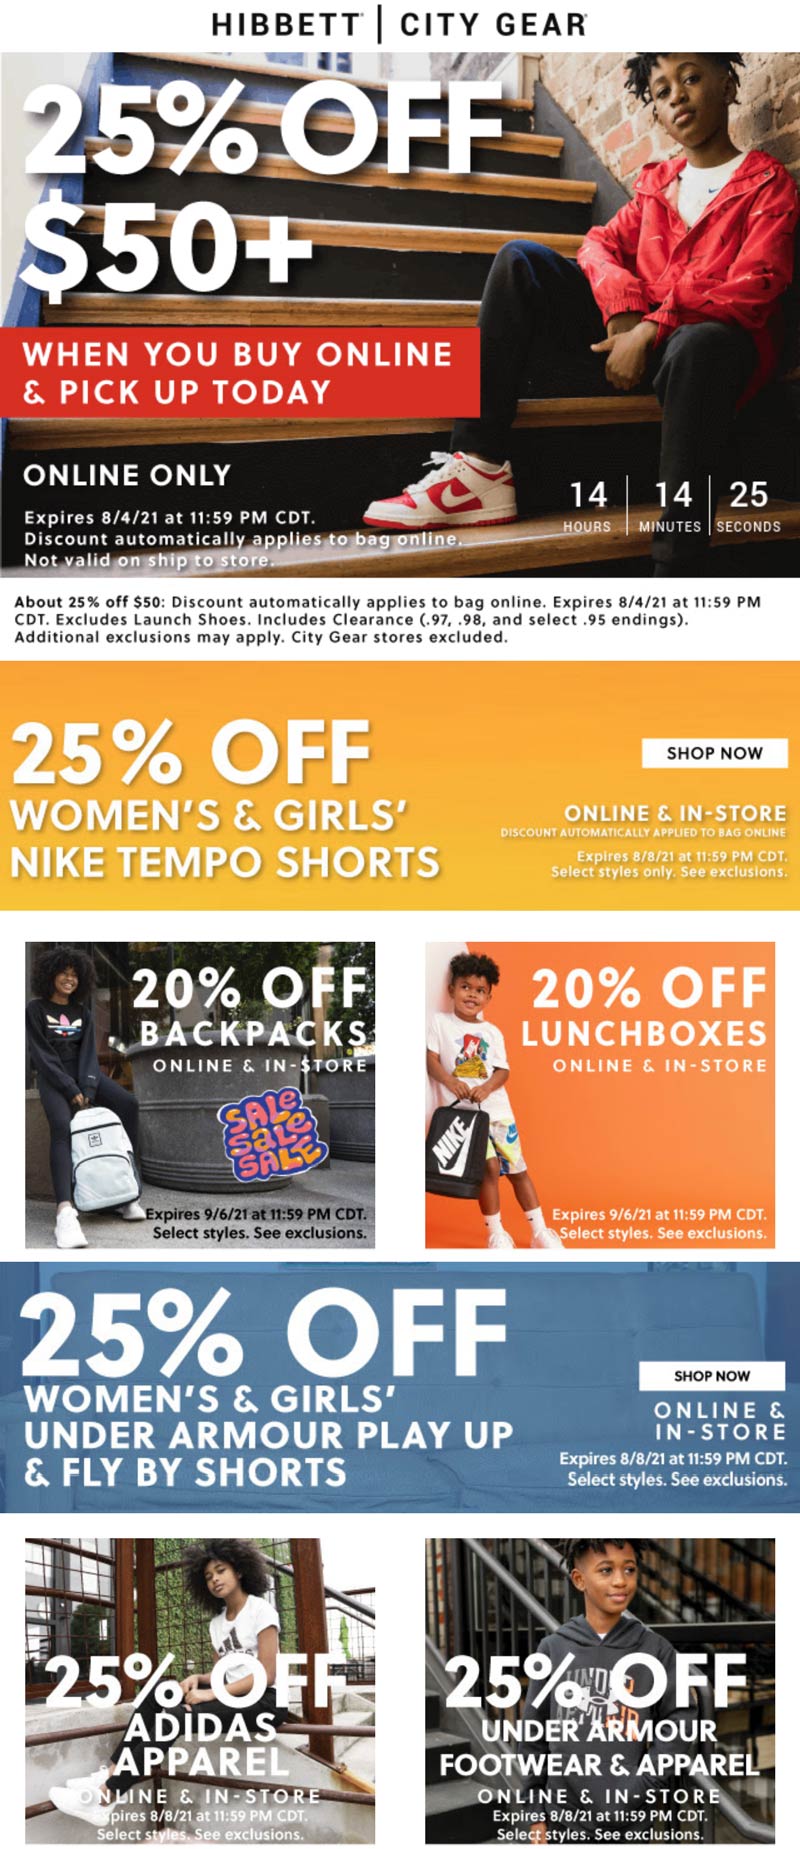 Hibbett stores Coupon  25% off $50 pickup in-store today at Hibbett and City Gear sporting goods #hibbett 